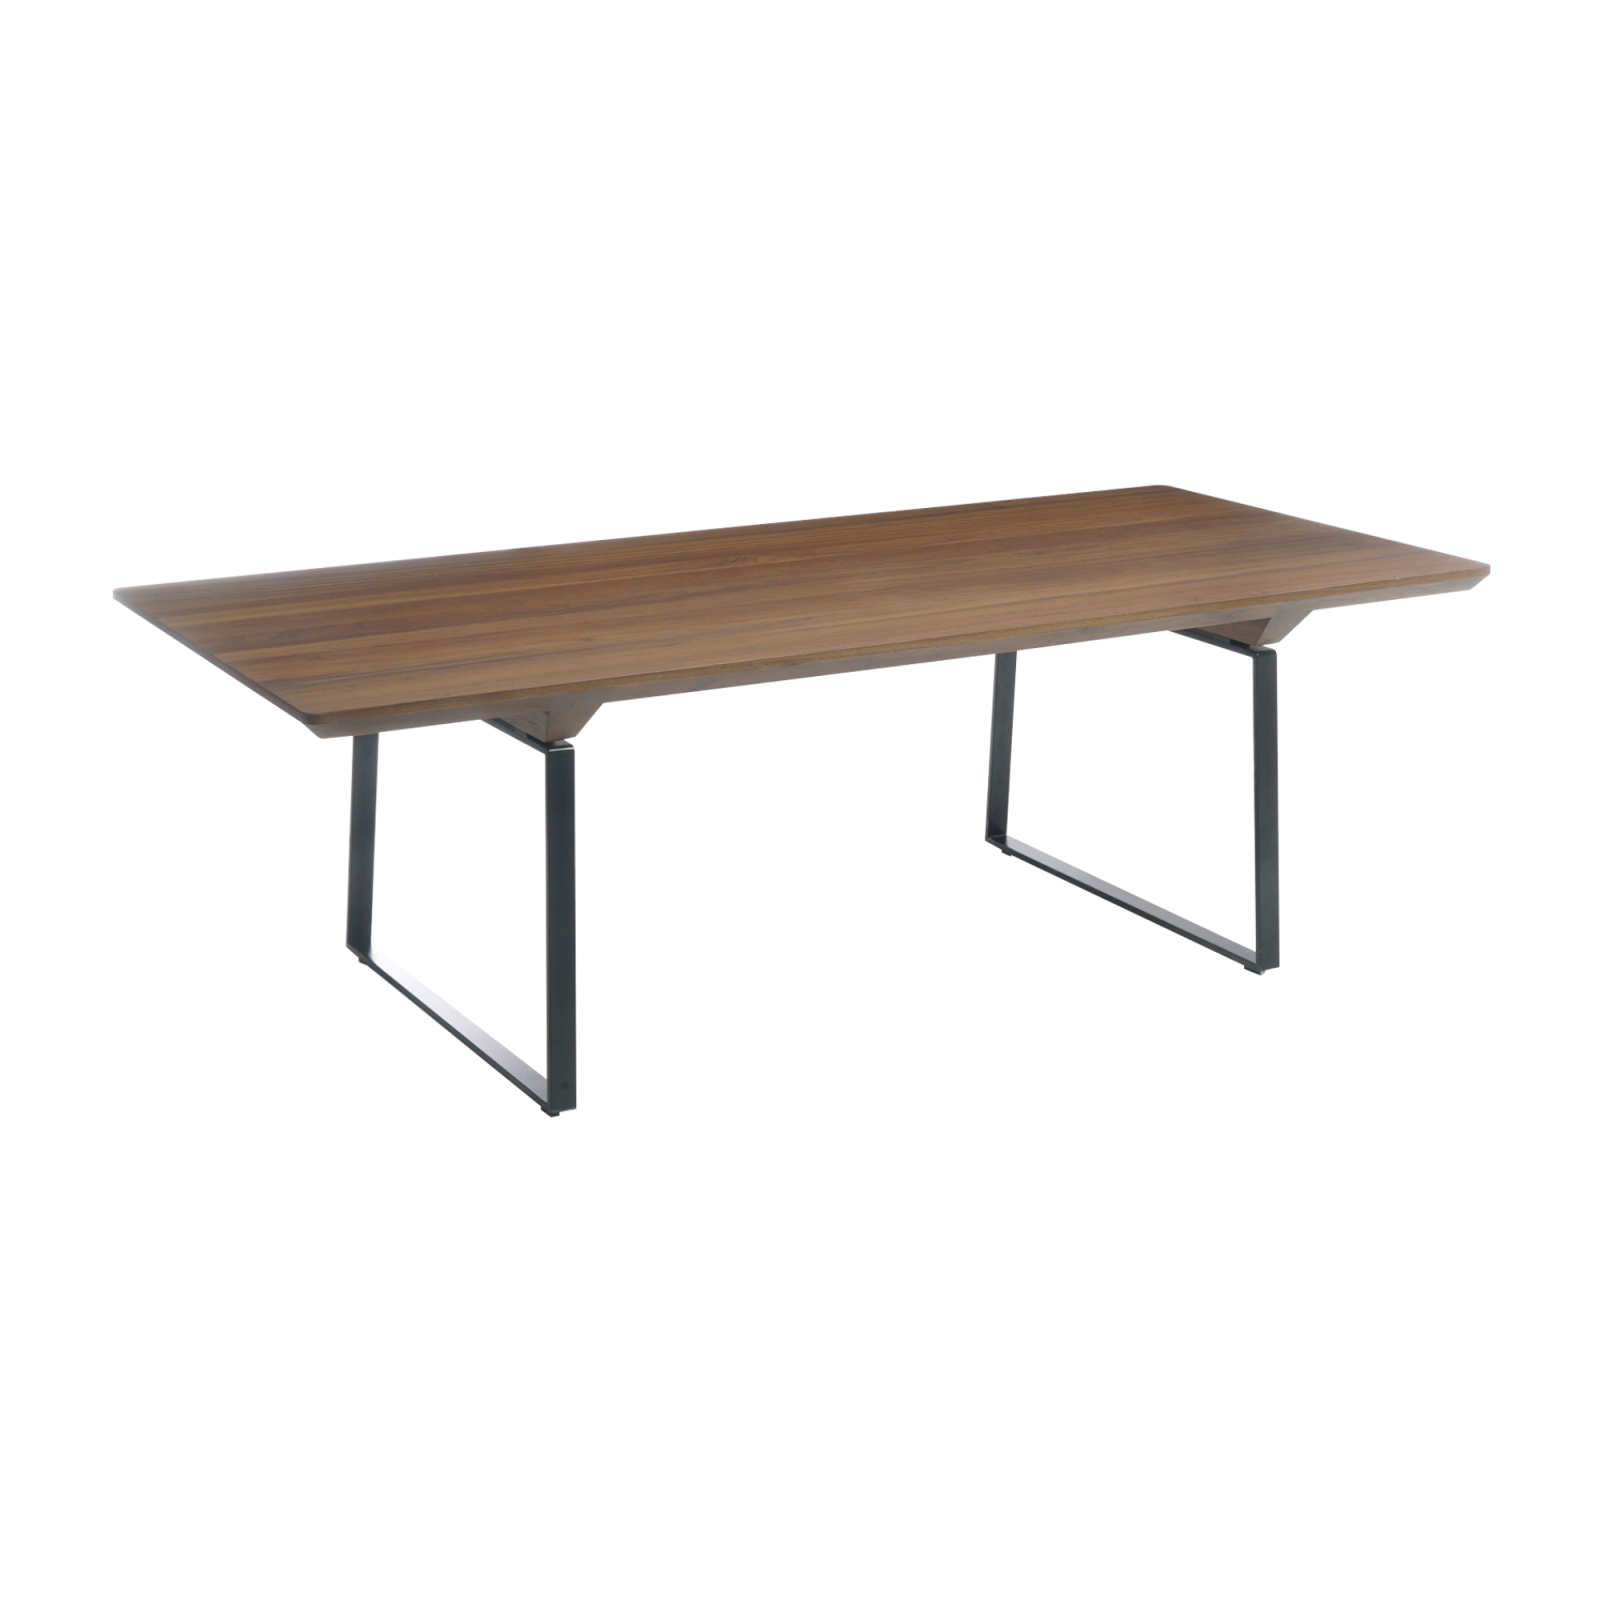 Rectangular Edge Table is made from a massive wooden tray and formal simple metal feet.